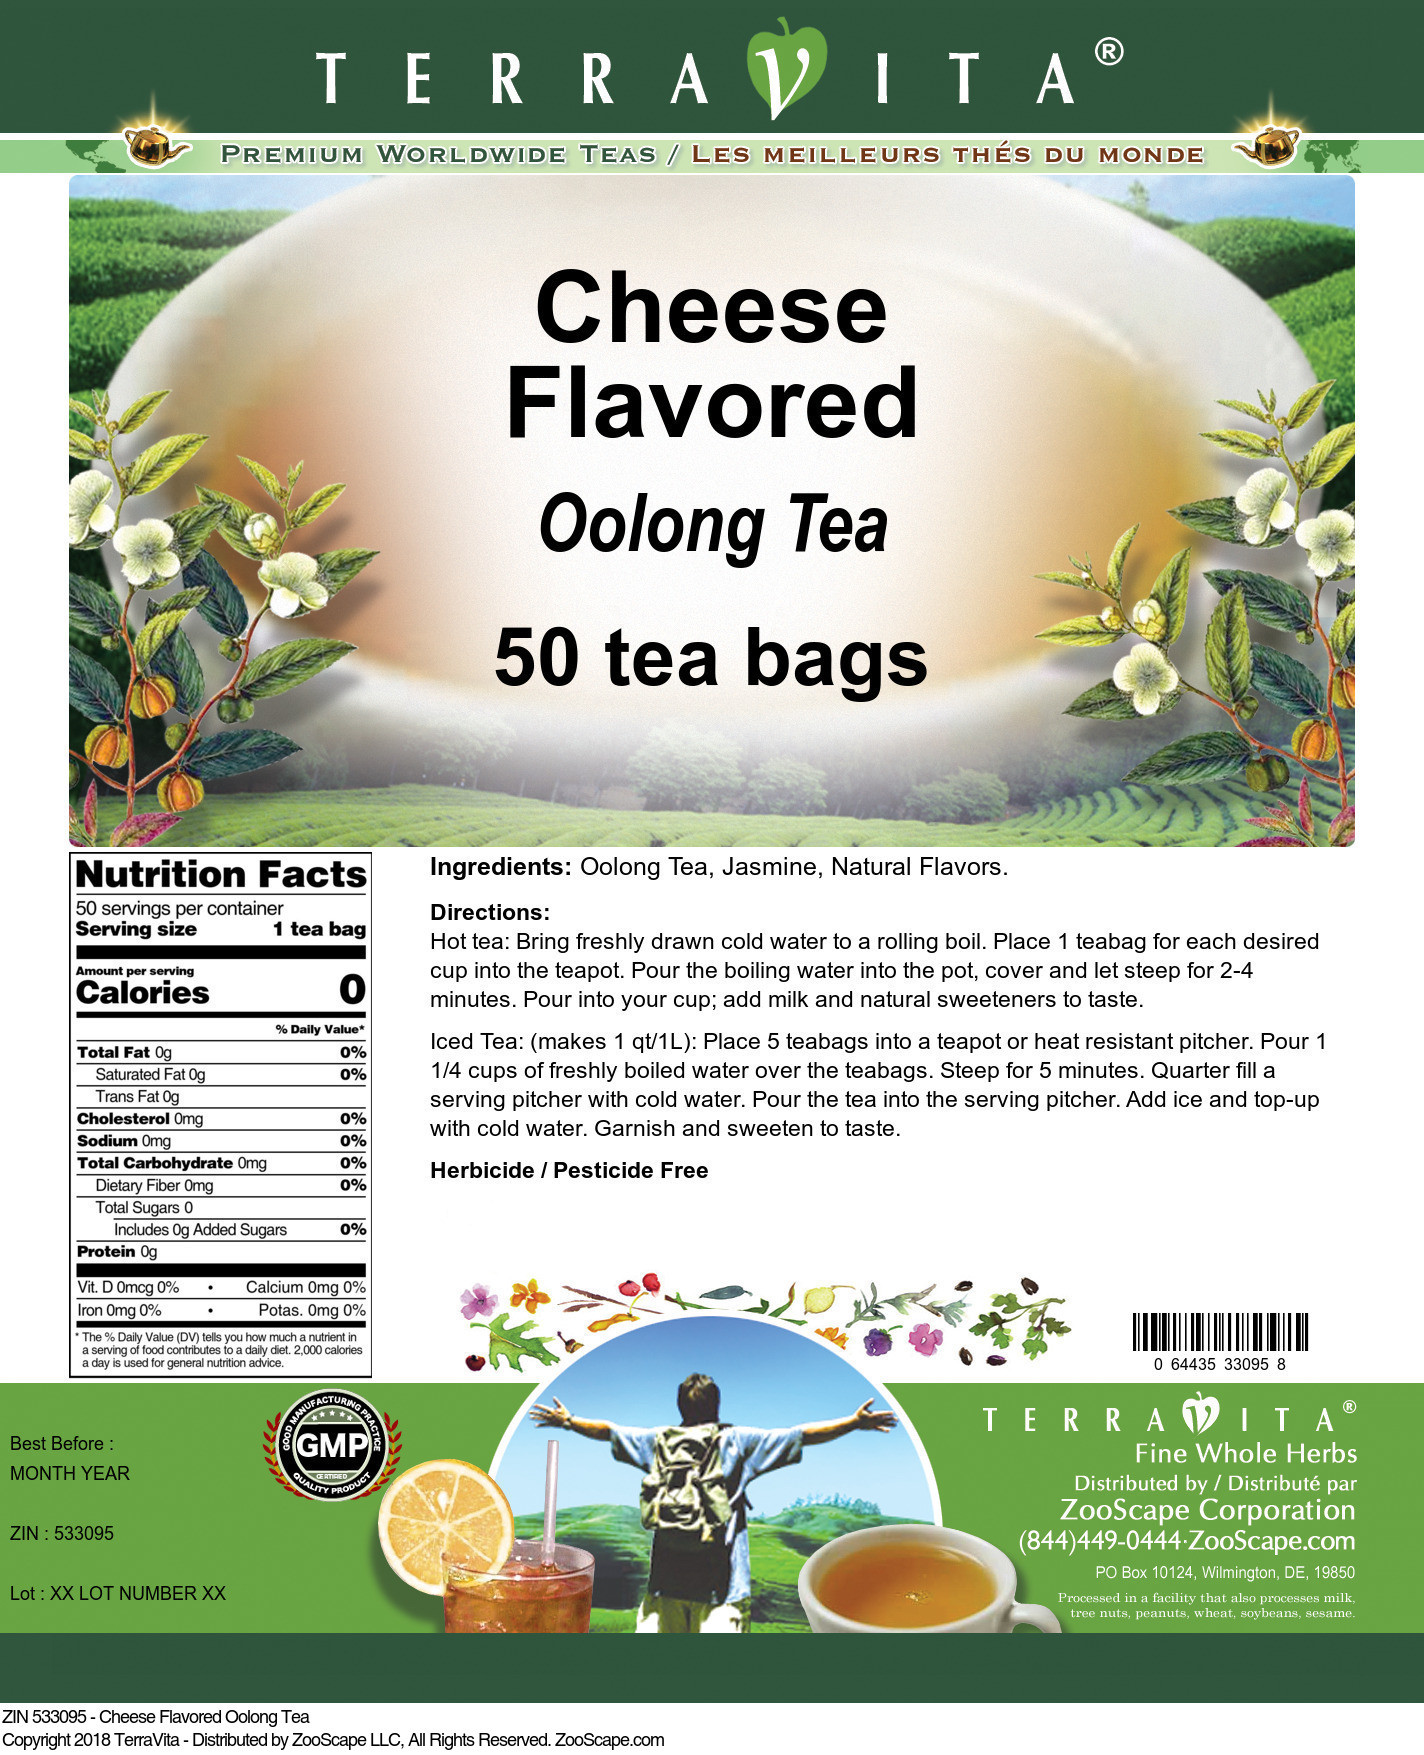 Cheese Flavored Oolong Tea - Label